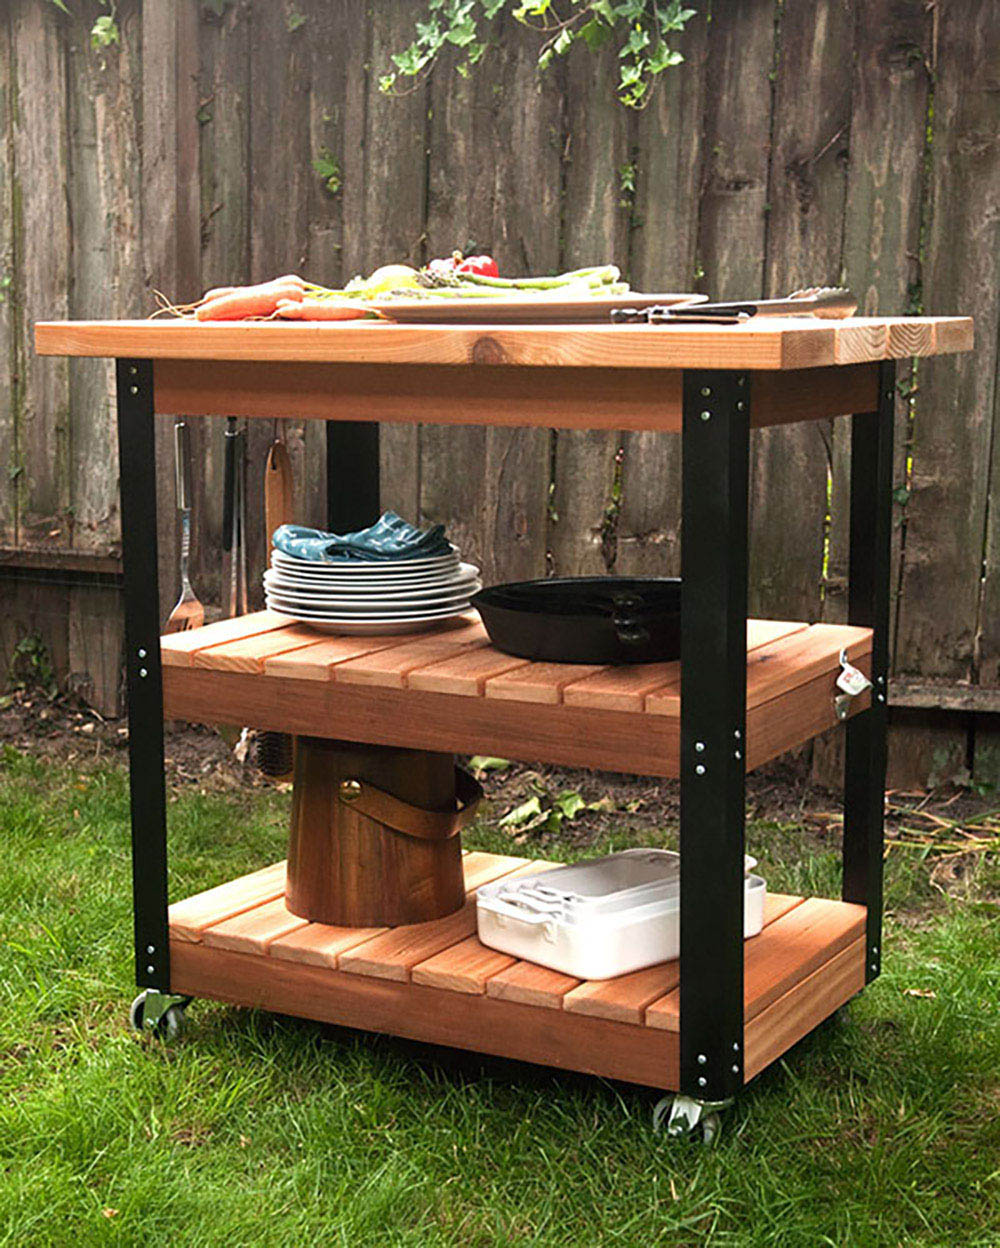 A DIY grill cart with black accents and three tiers.